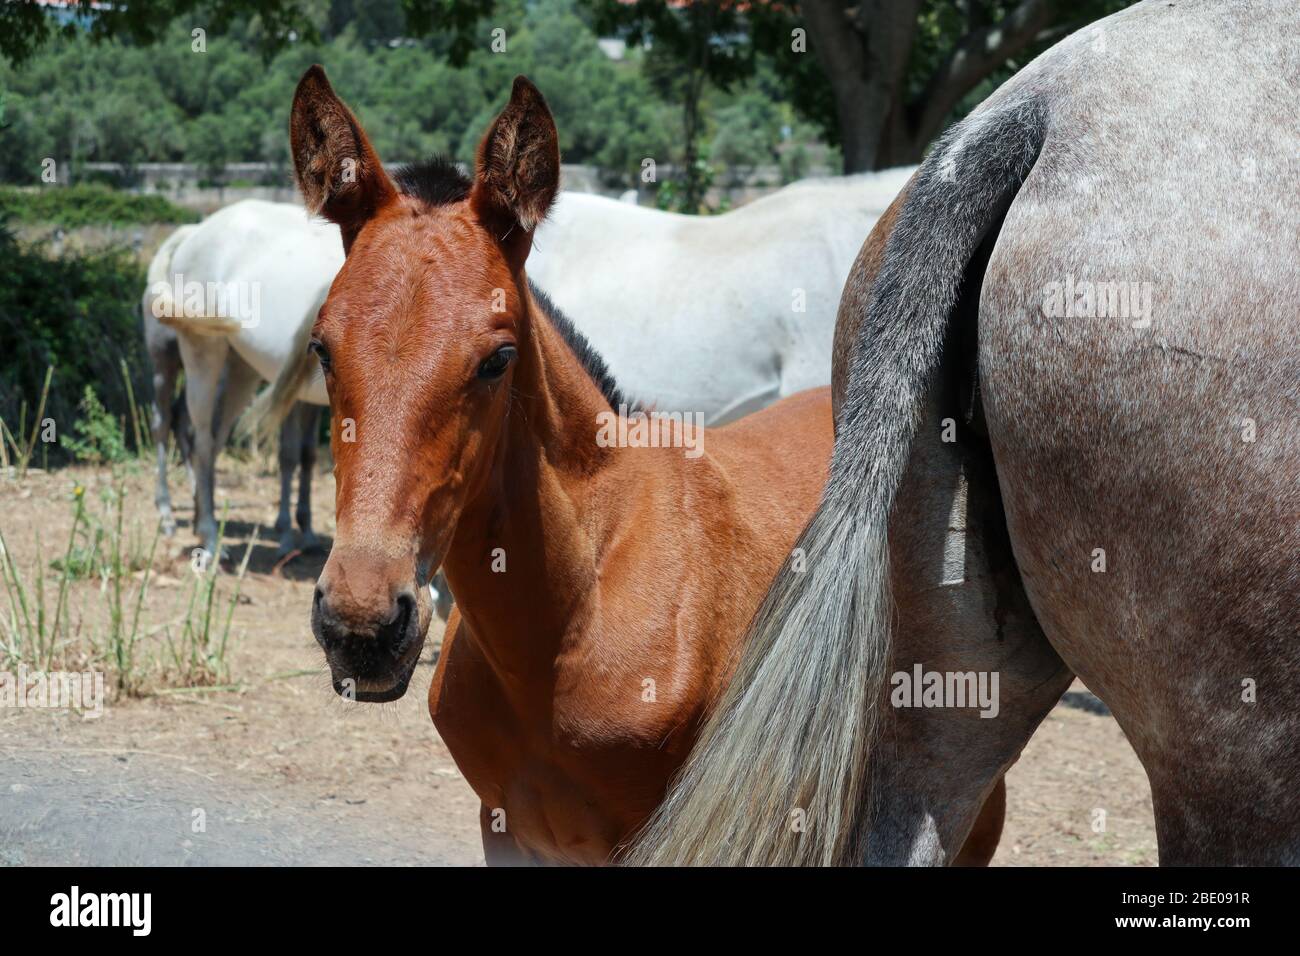 Lusitano foal standing behind the tail of its mare mother Stock Photo